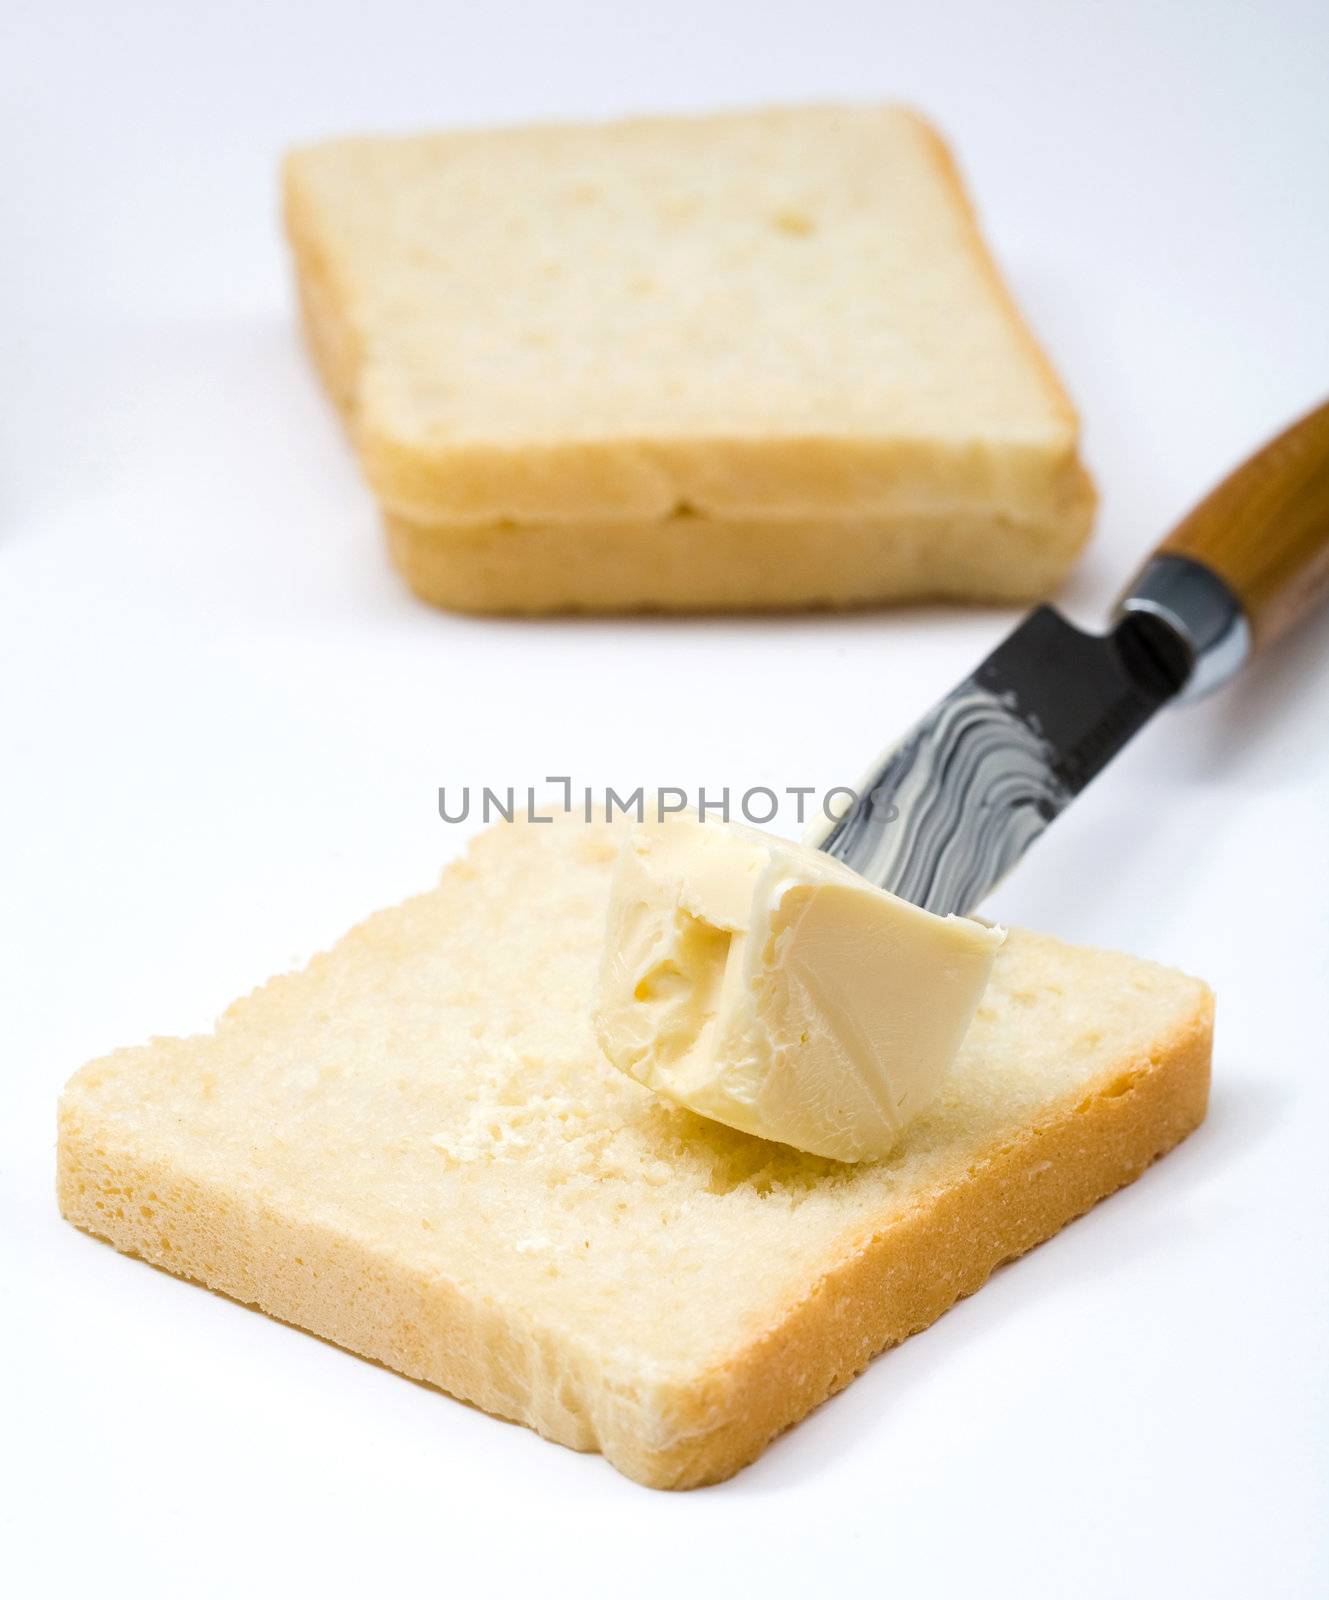 Stock photo: an image of butter on bread and a knife